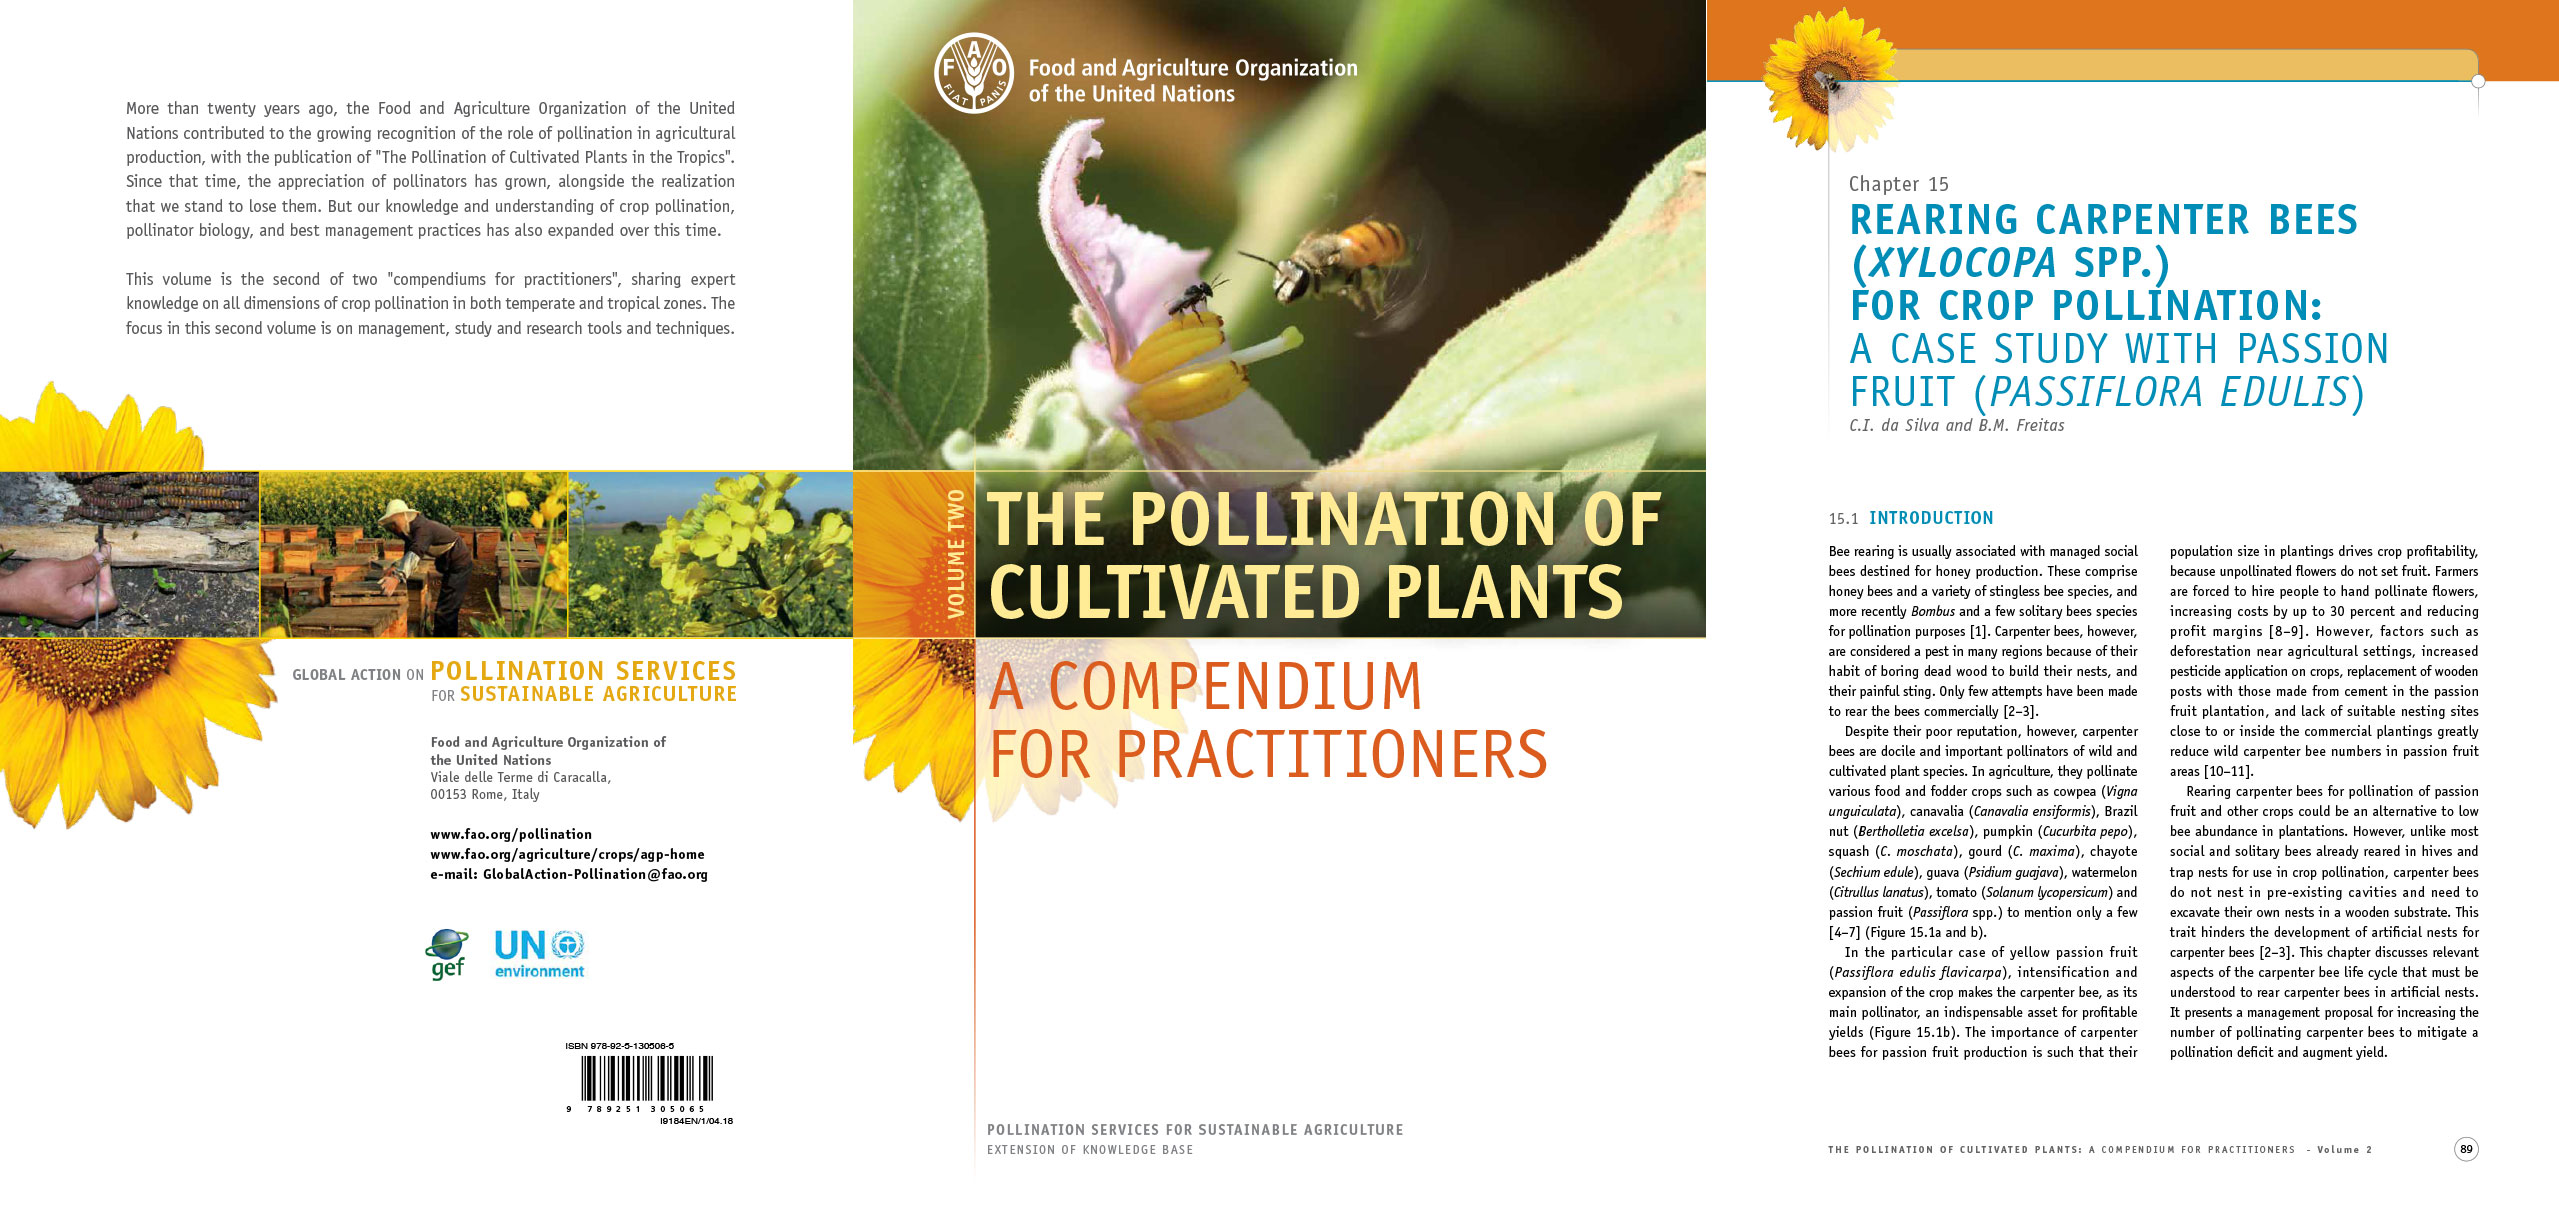 The Pollination of Cultivated Plants - A Compendium for Practitioners